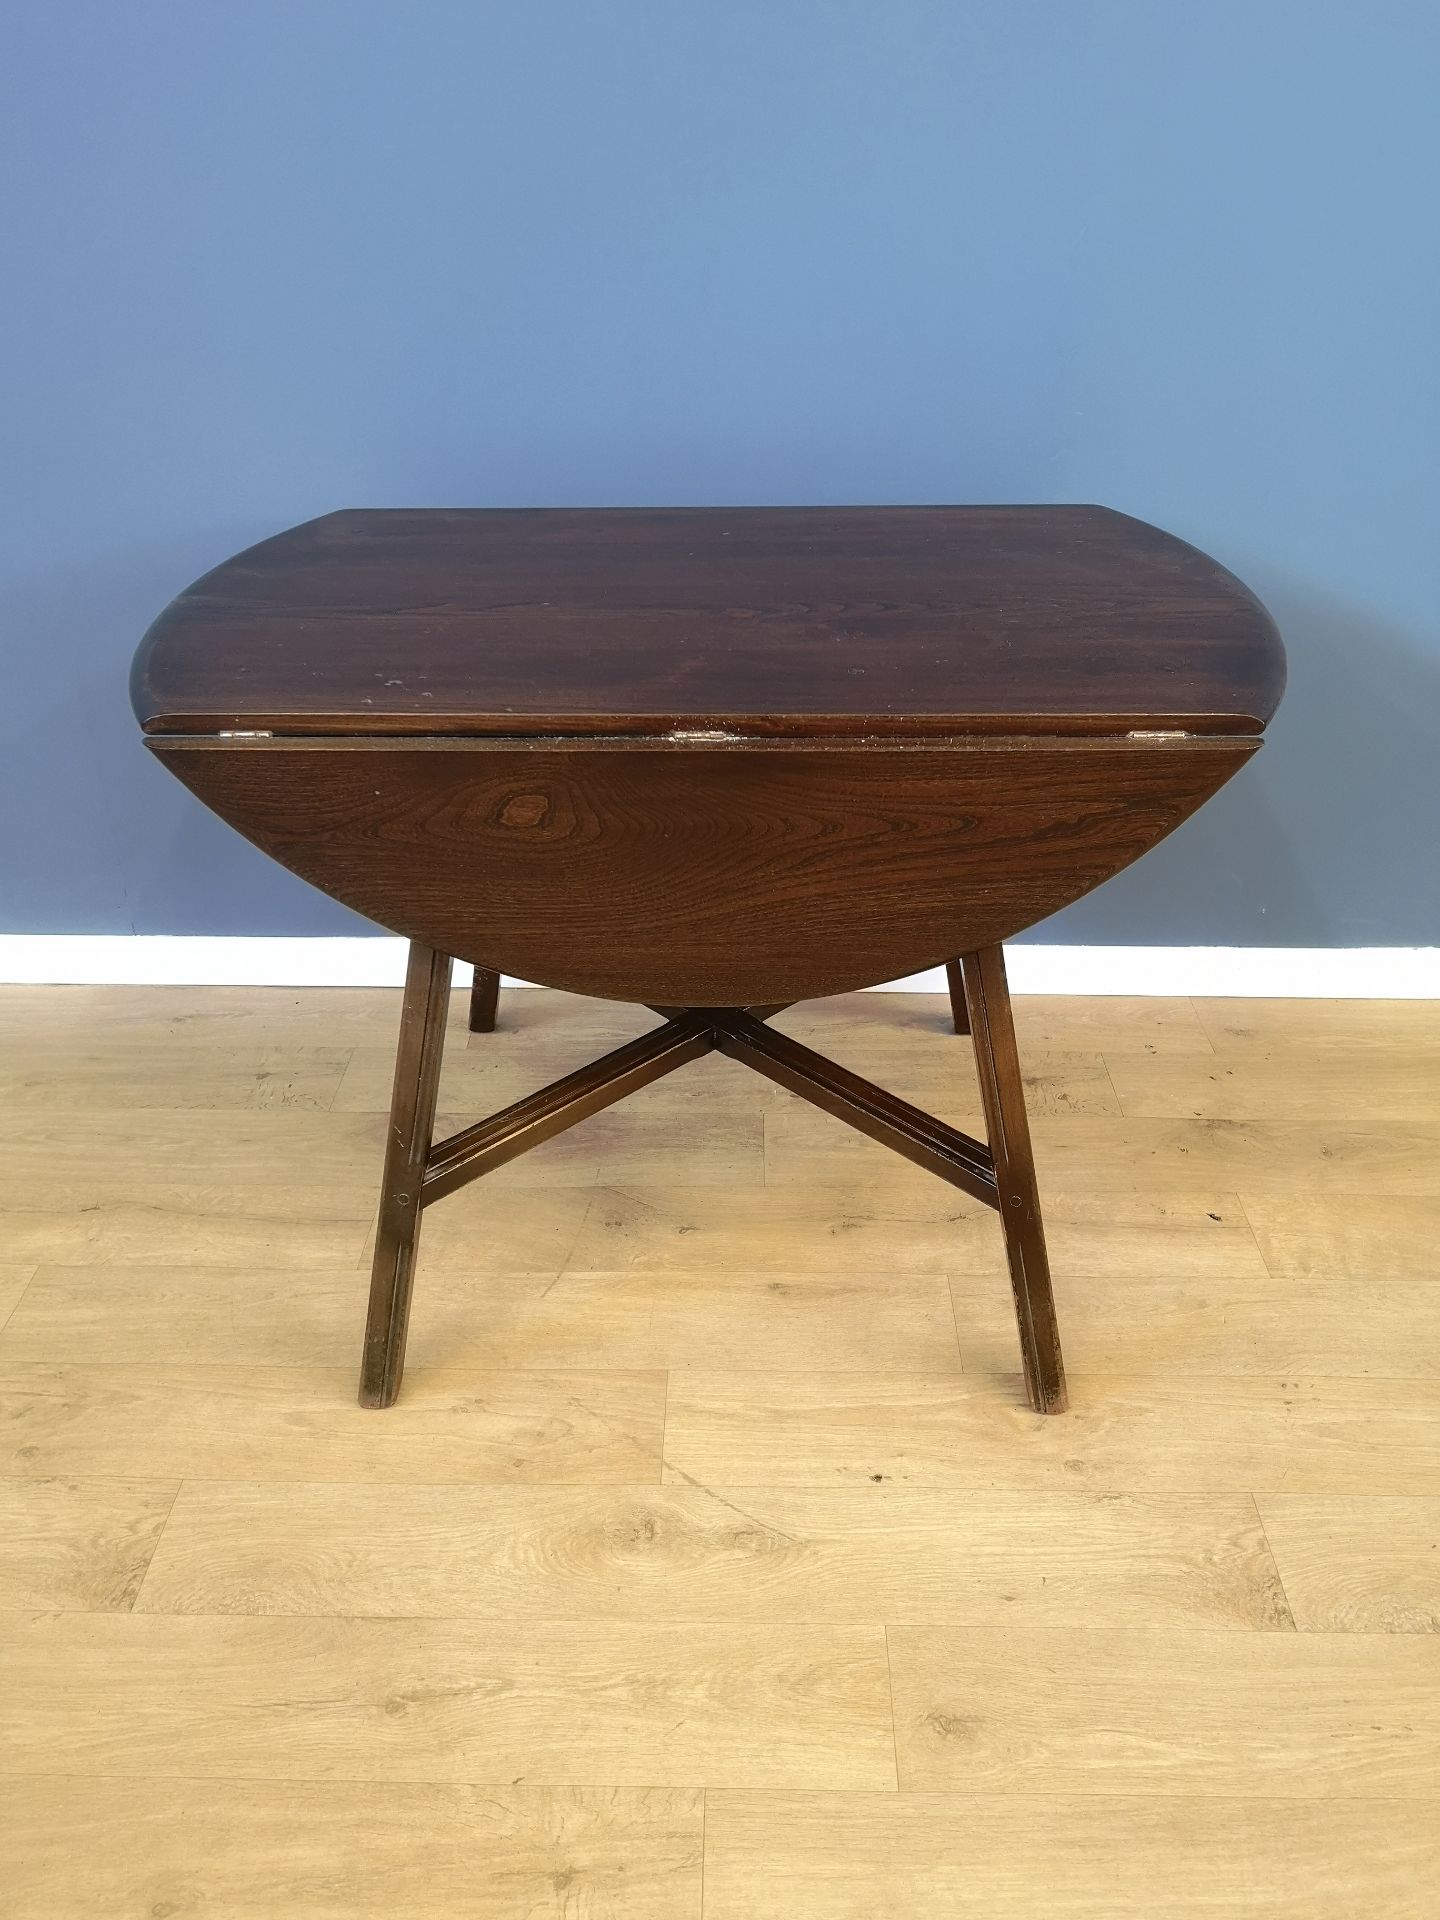 Ercol drop leaf table - Image 2 of 4